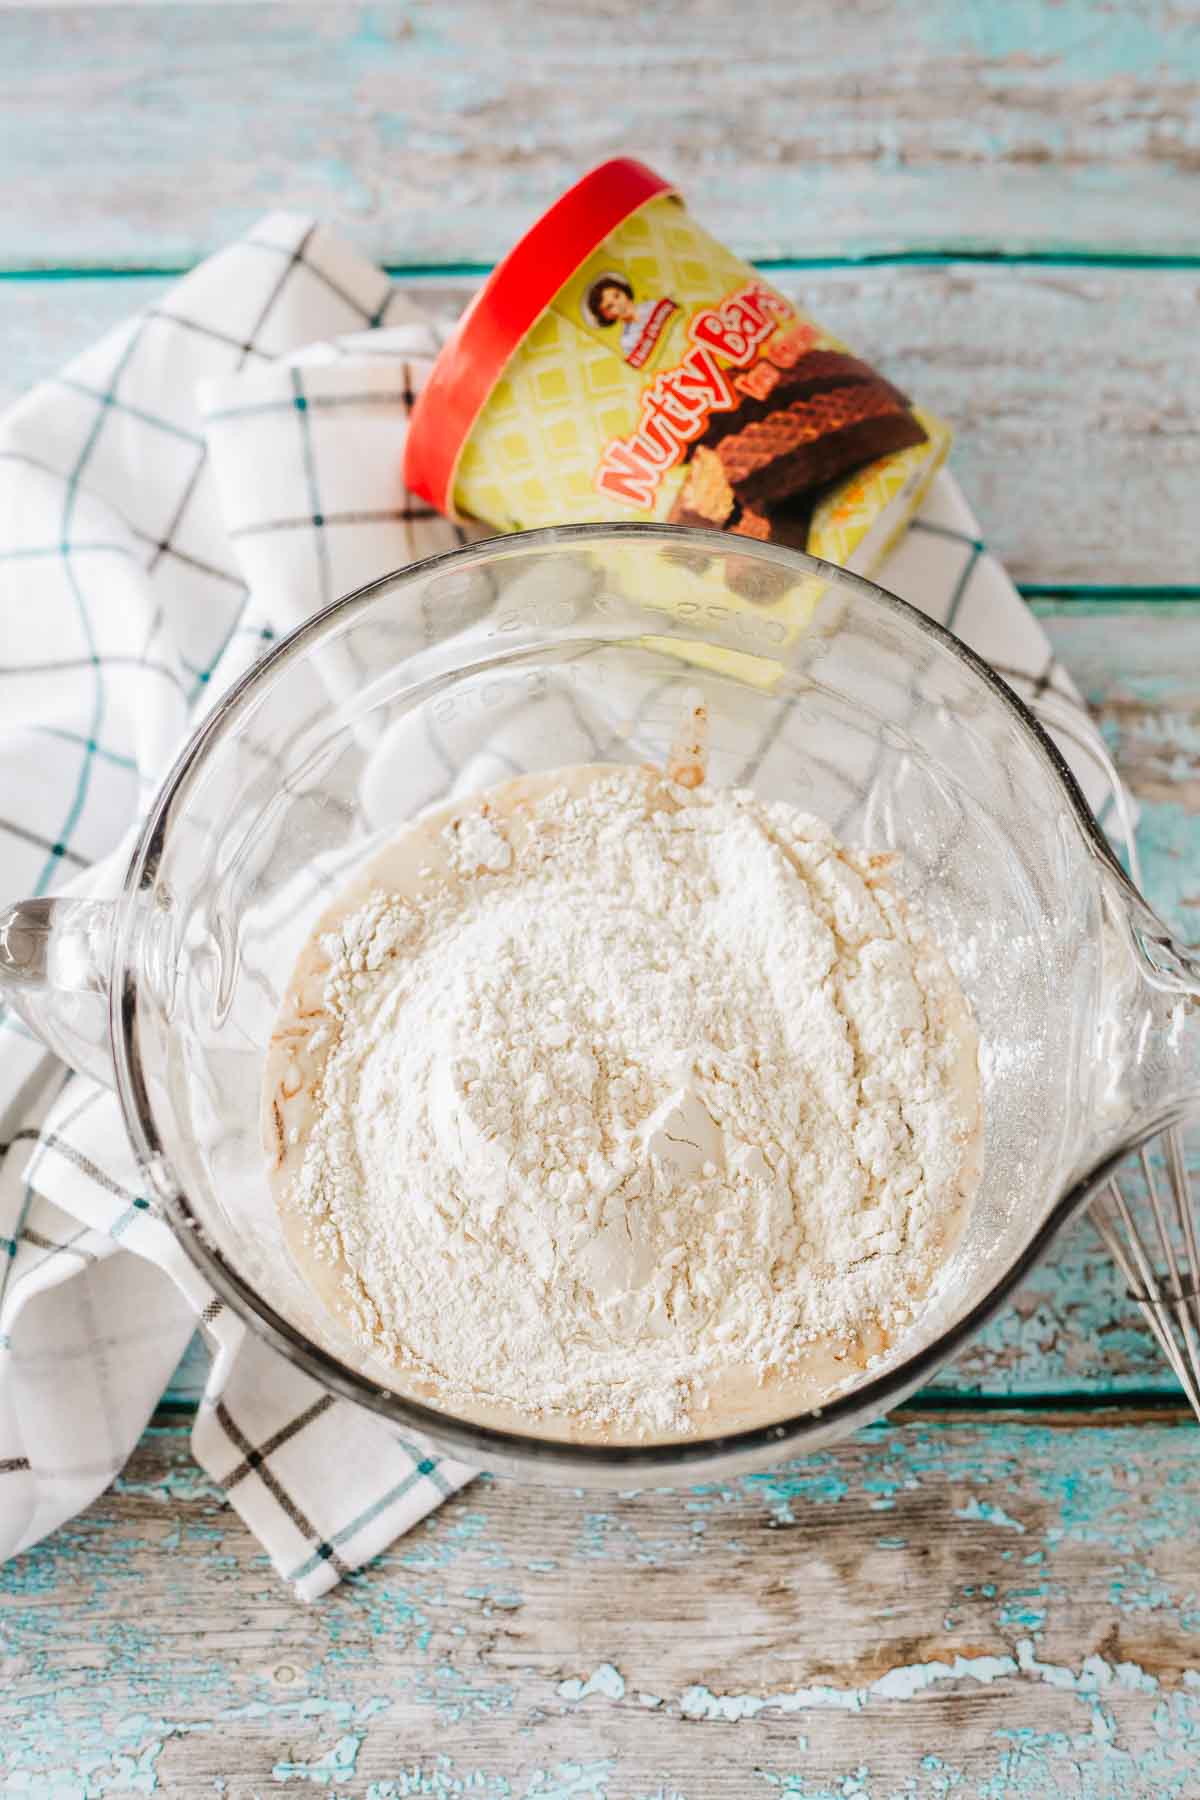 All-purpose flour and melted ice cream in a glass mixing bowl.